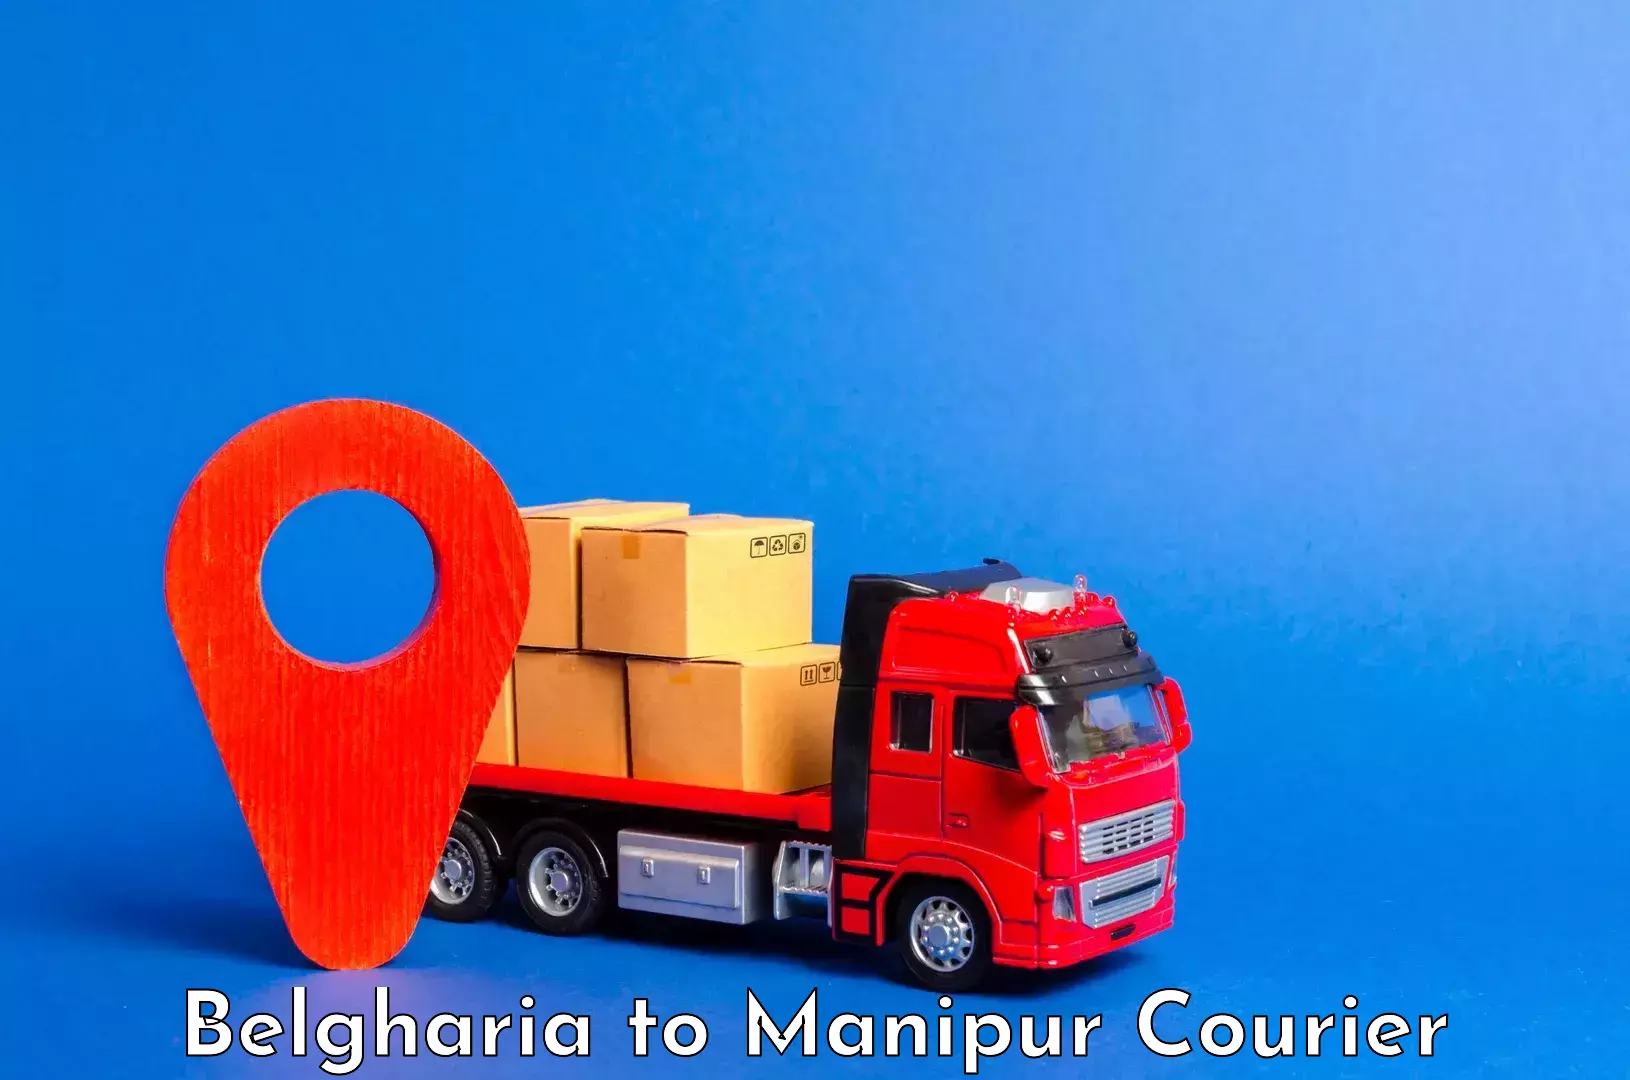 Luggage shipment specialists Belgharia to Manipur